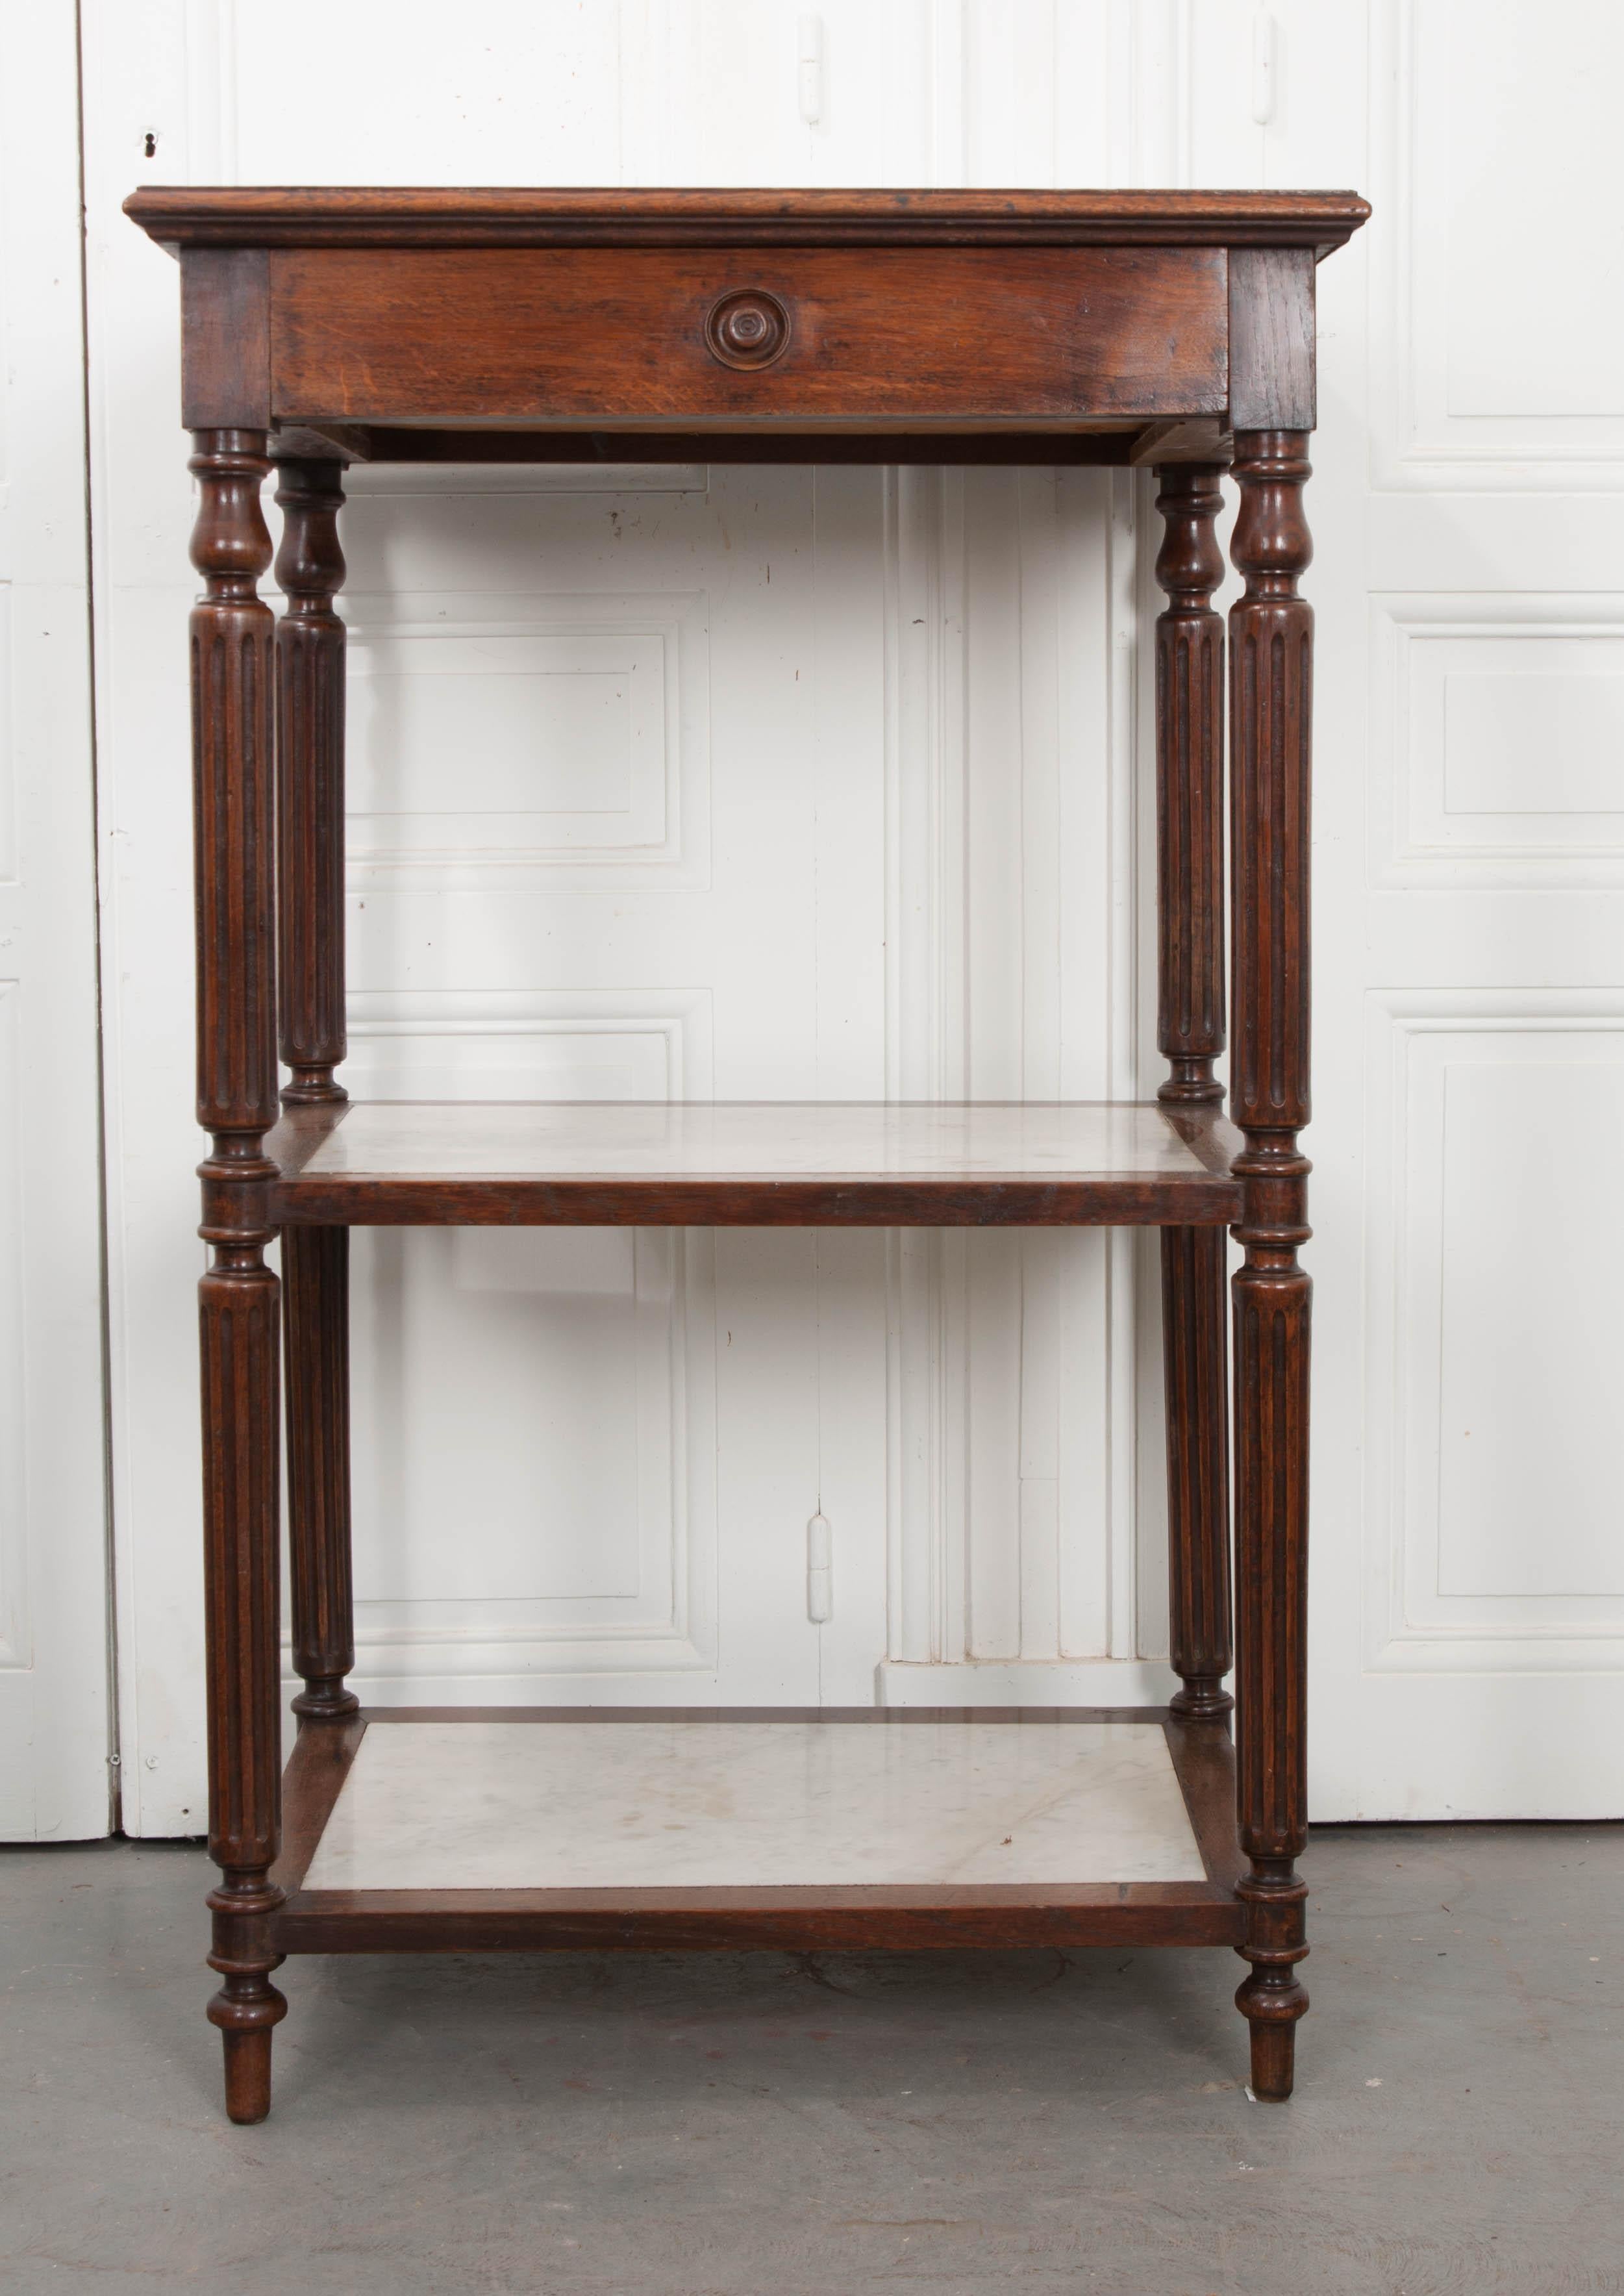 This handsome French 19th century three-tier étagère would make an attractive addition to any room whether for the display of collectibles in a den or for extra storage of towels in the bath.